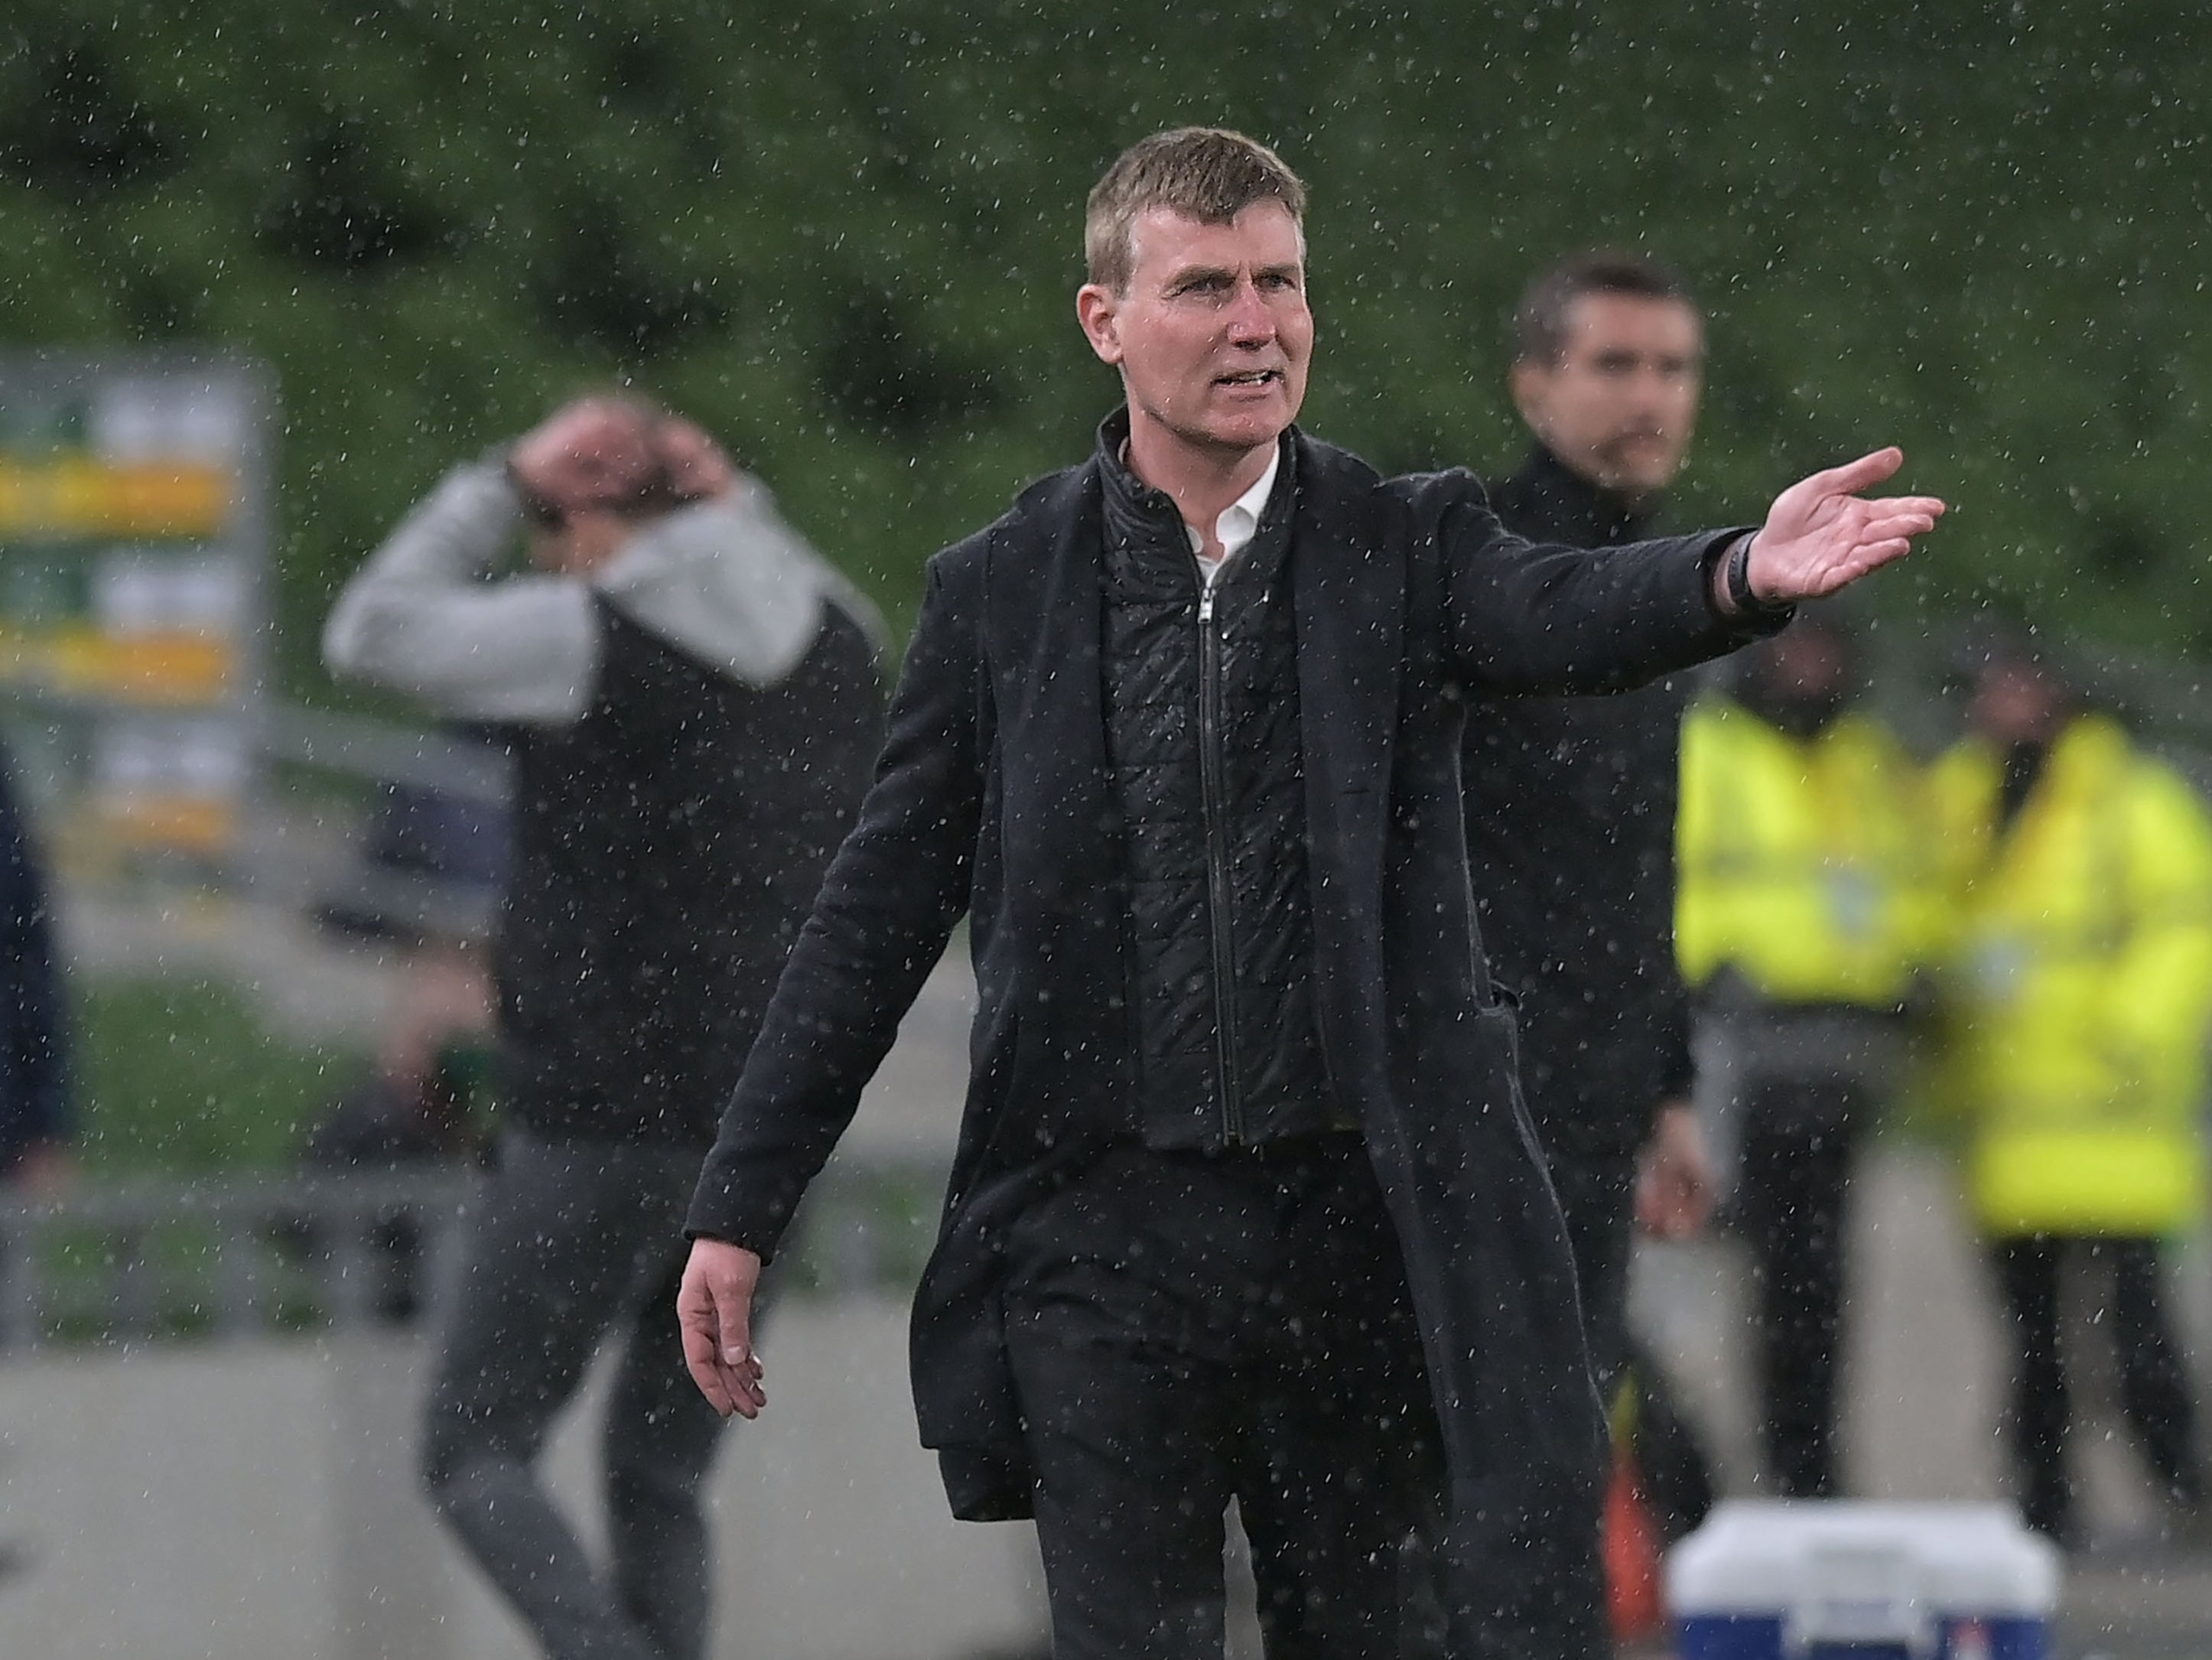 Stephen Kenny is yet to win as Ireland manager